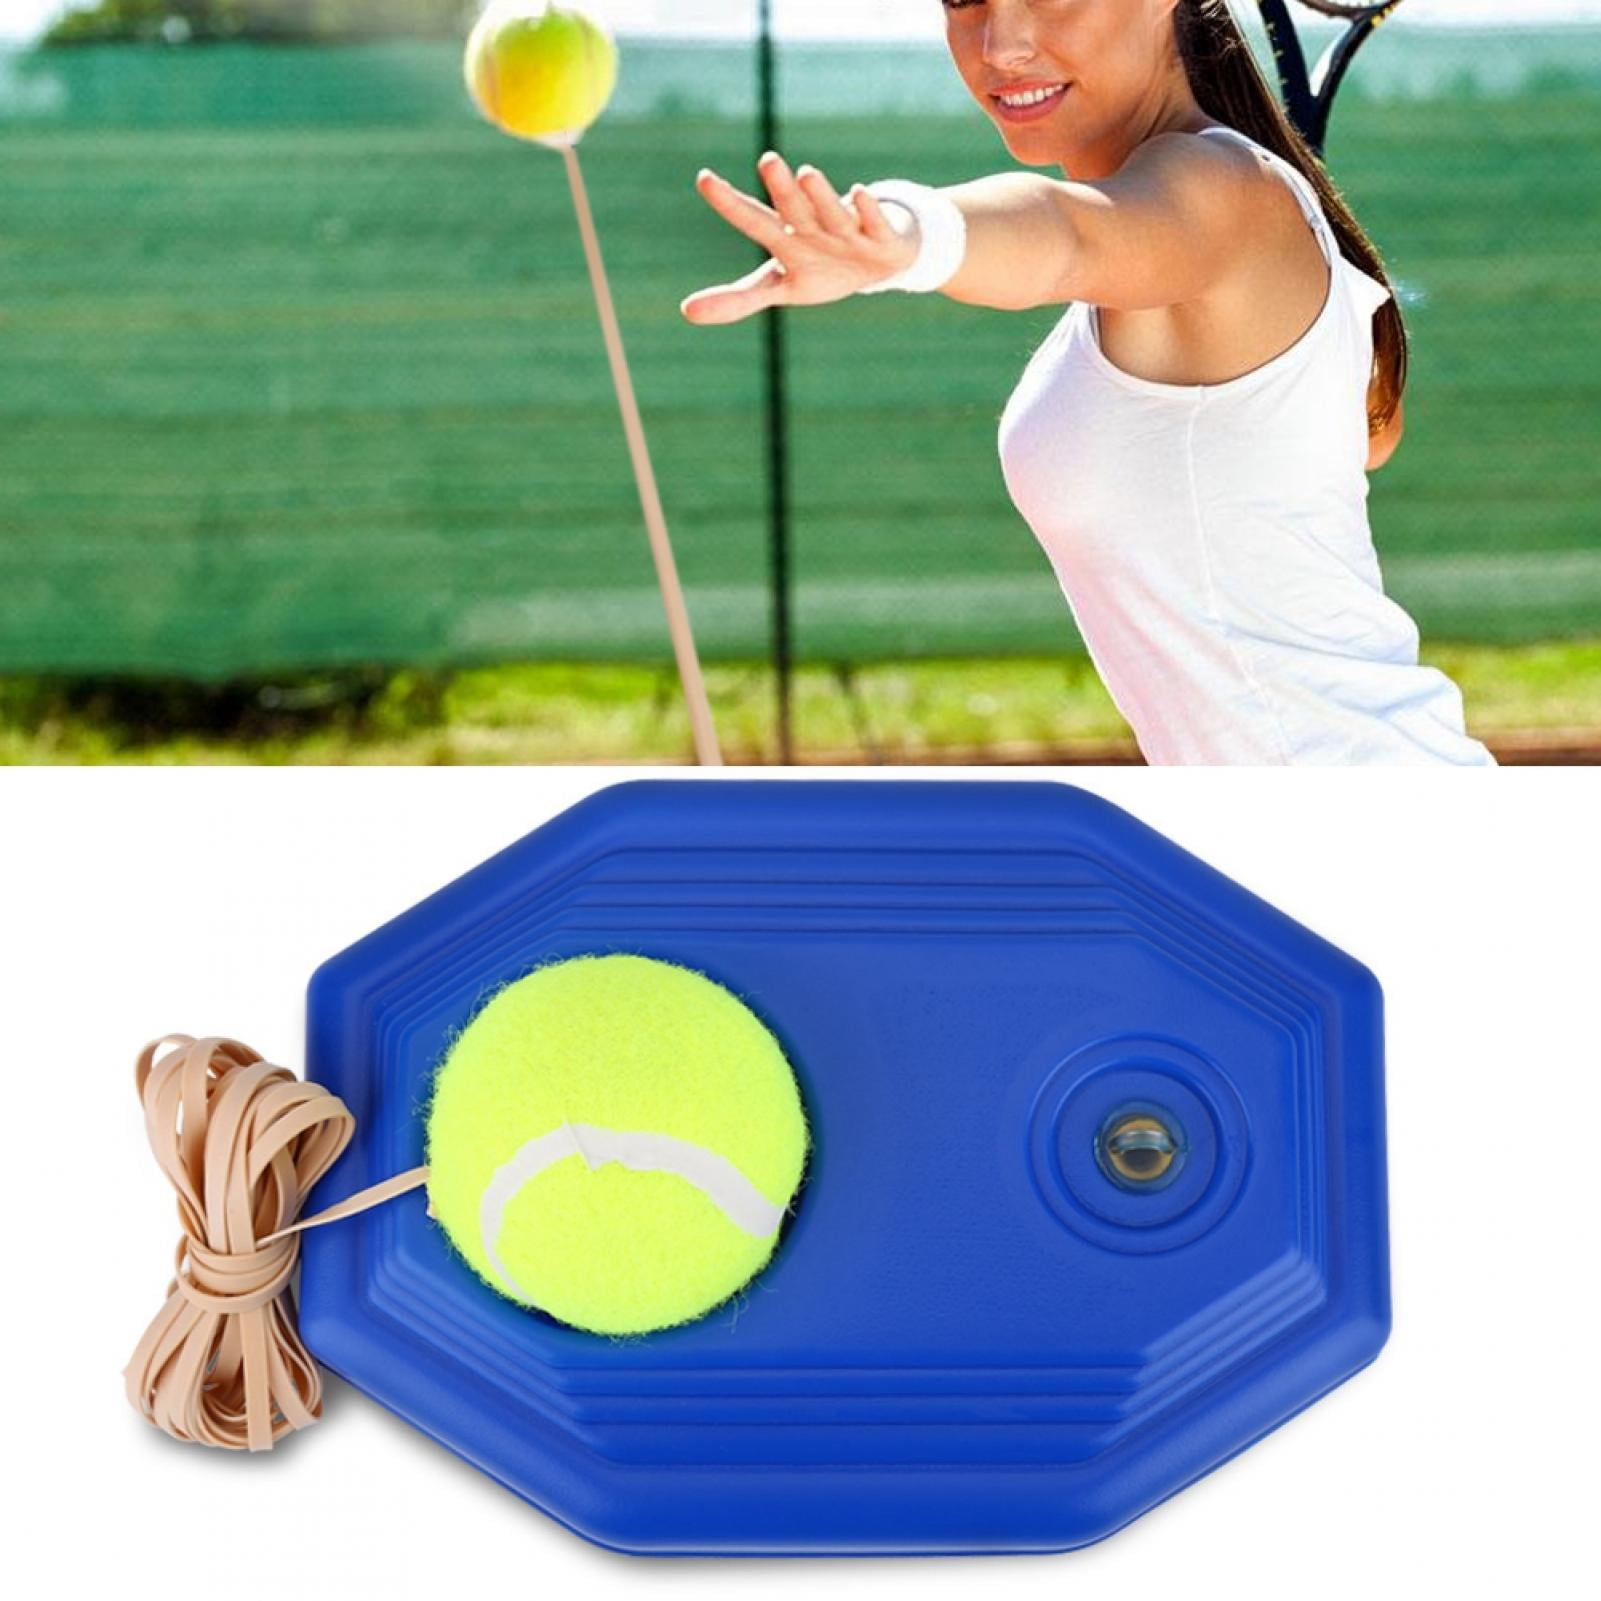 Tennis Ball Back Base Trainer w/ Rubber Elastic Rope for Single Person Practice 